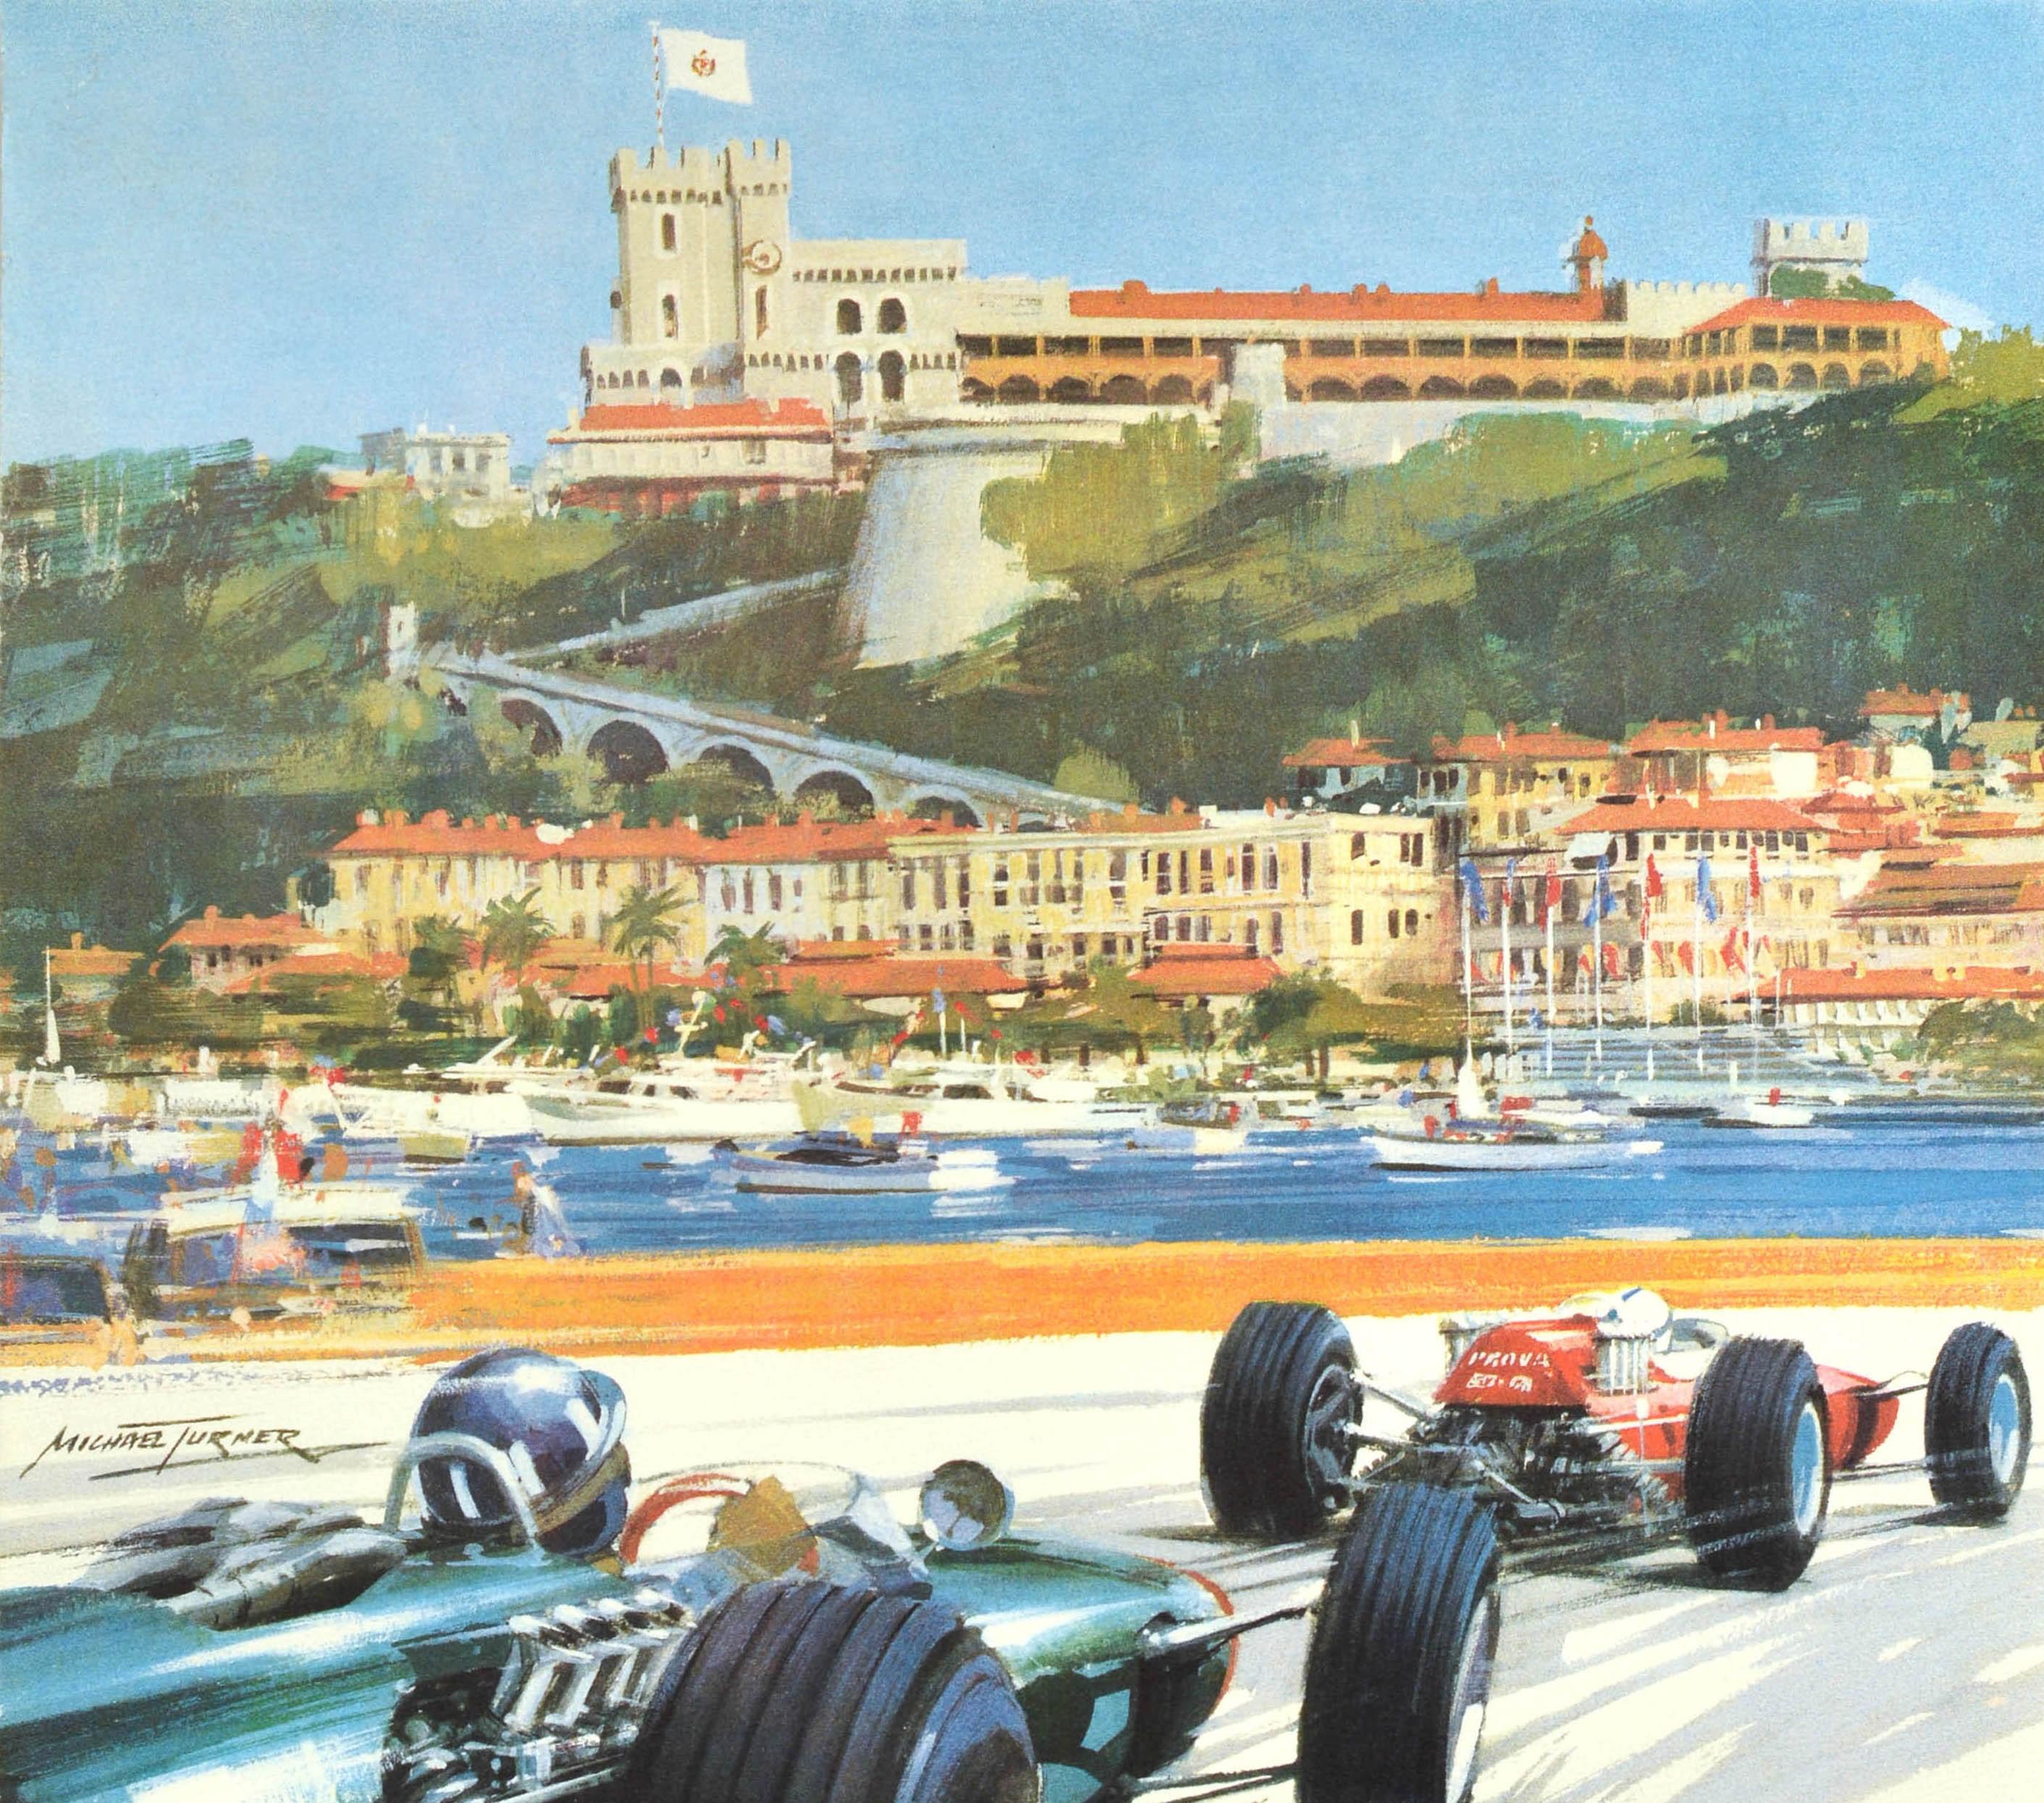 Original vintage F1 motorsport poster for the Monaco GP 1966 featuring a great design by Michael Turner (b. 1934) depicting two classic racing cars driving at speed on a picturesque waterside road with sailing boats in the harbour and the historic